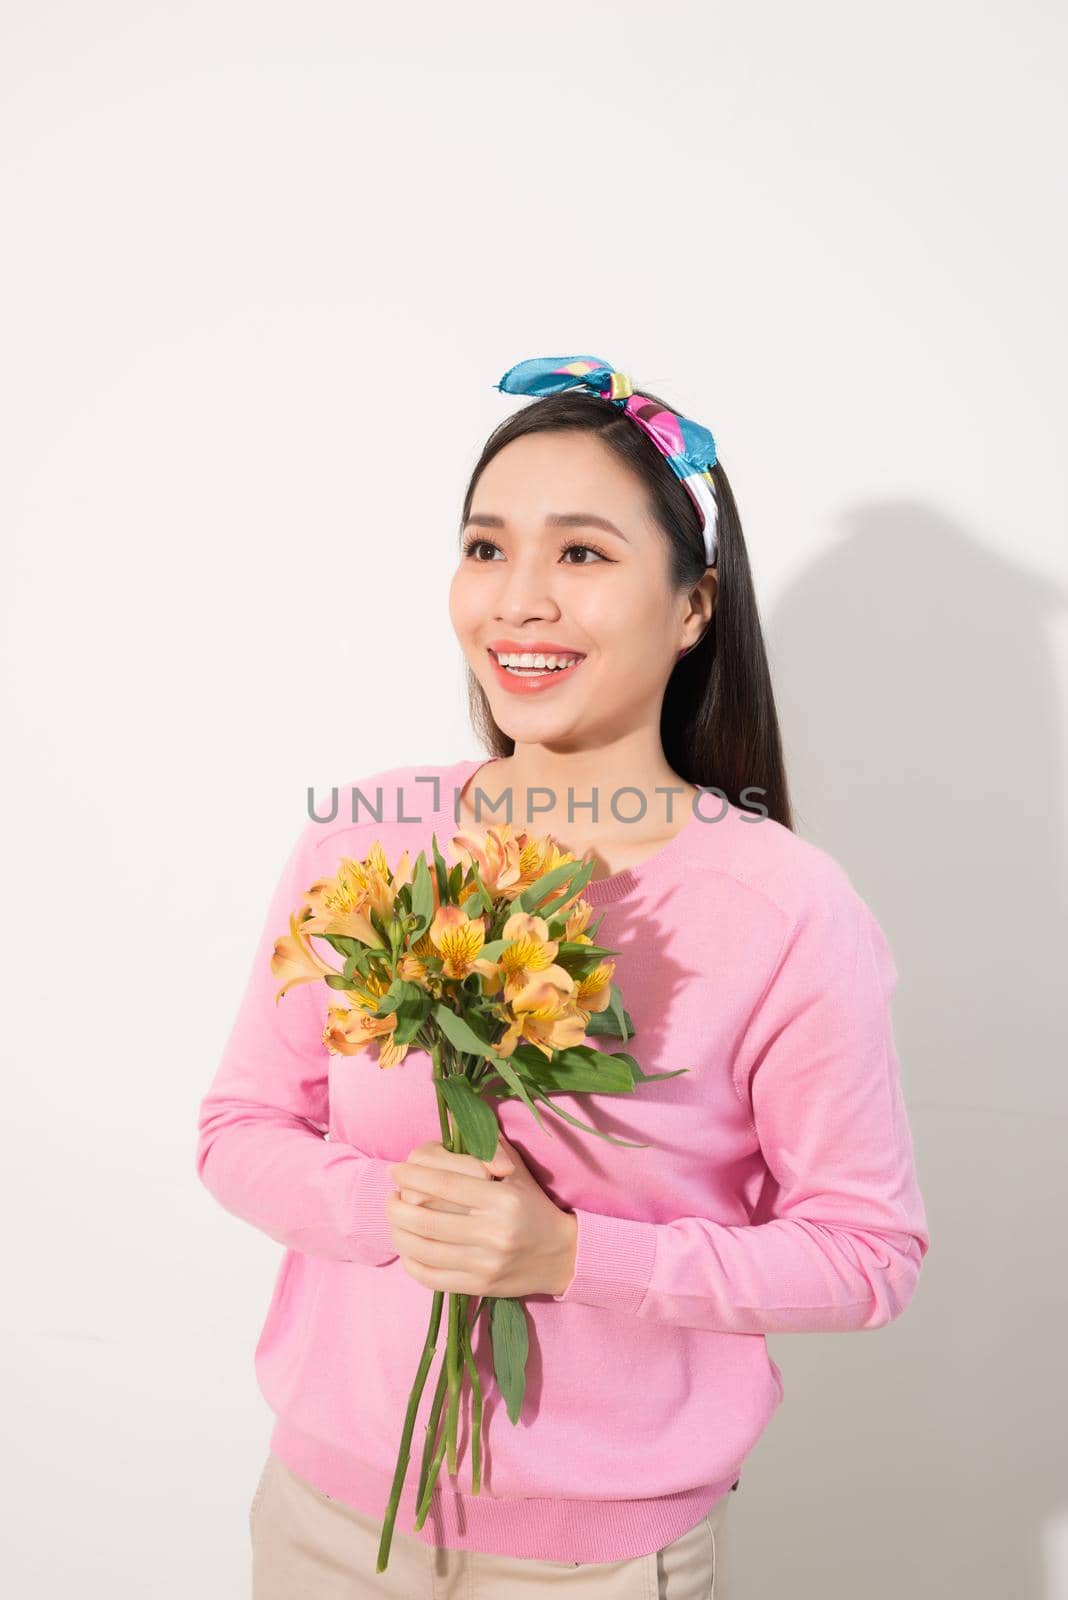 Toothy smiling happy woman holding flower . White background isolated portrait.